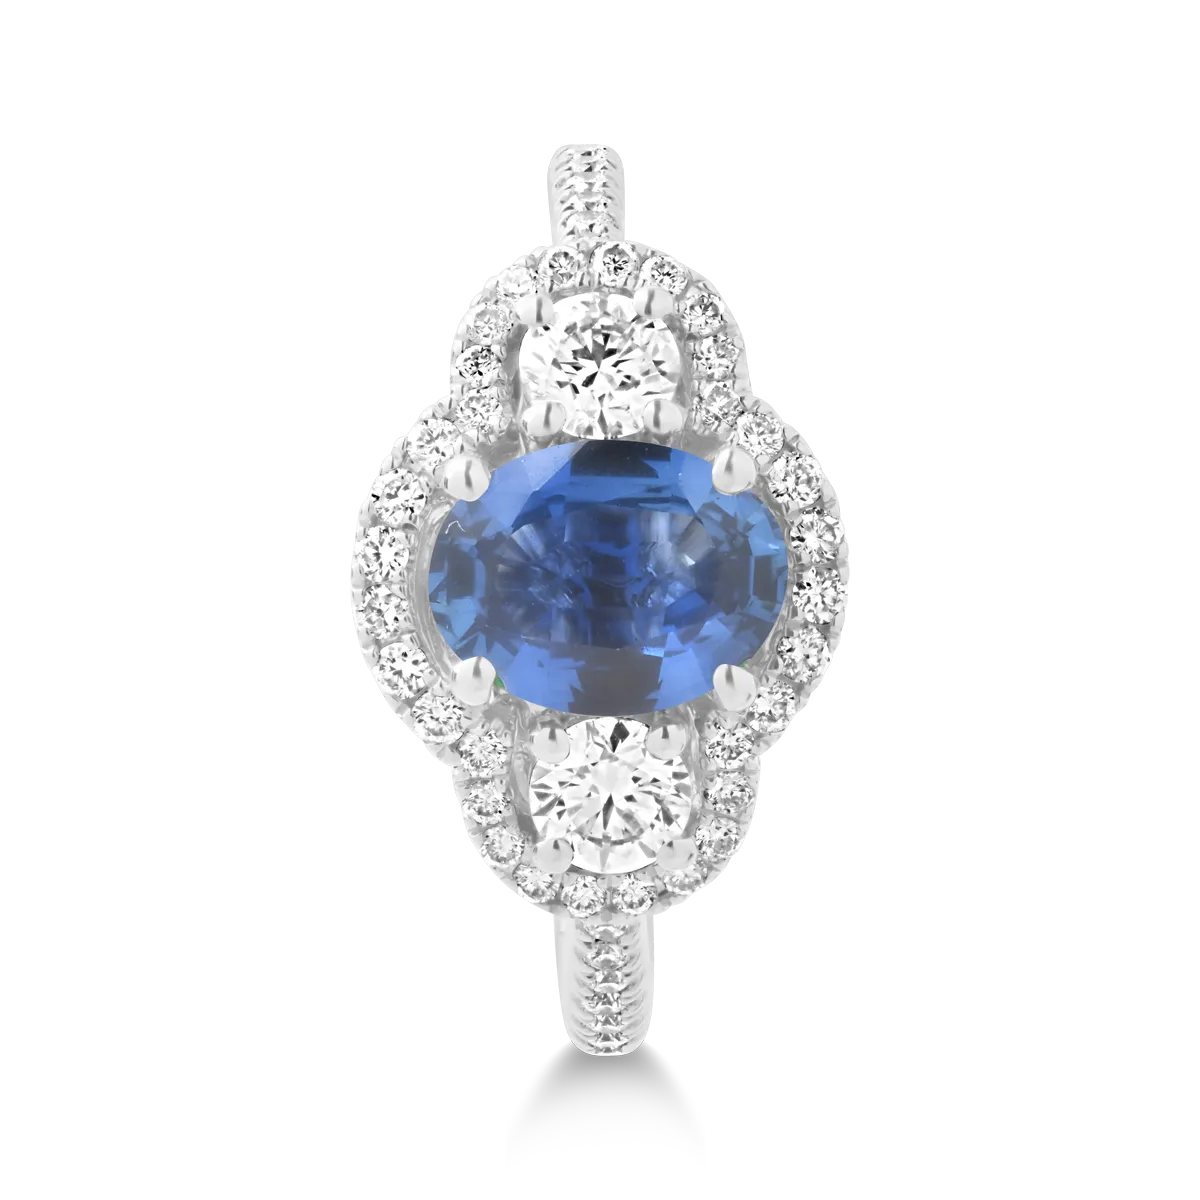 18K white gold ring with 1.31ct sapphire and 0.68ct diamonds